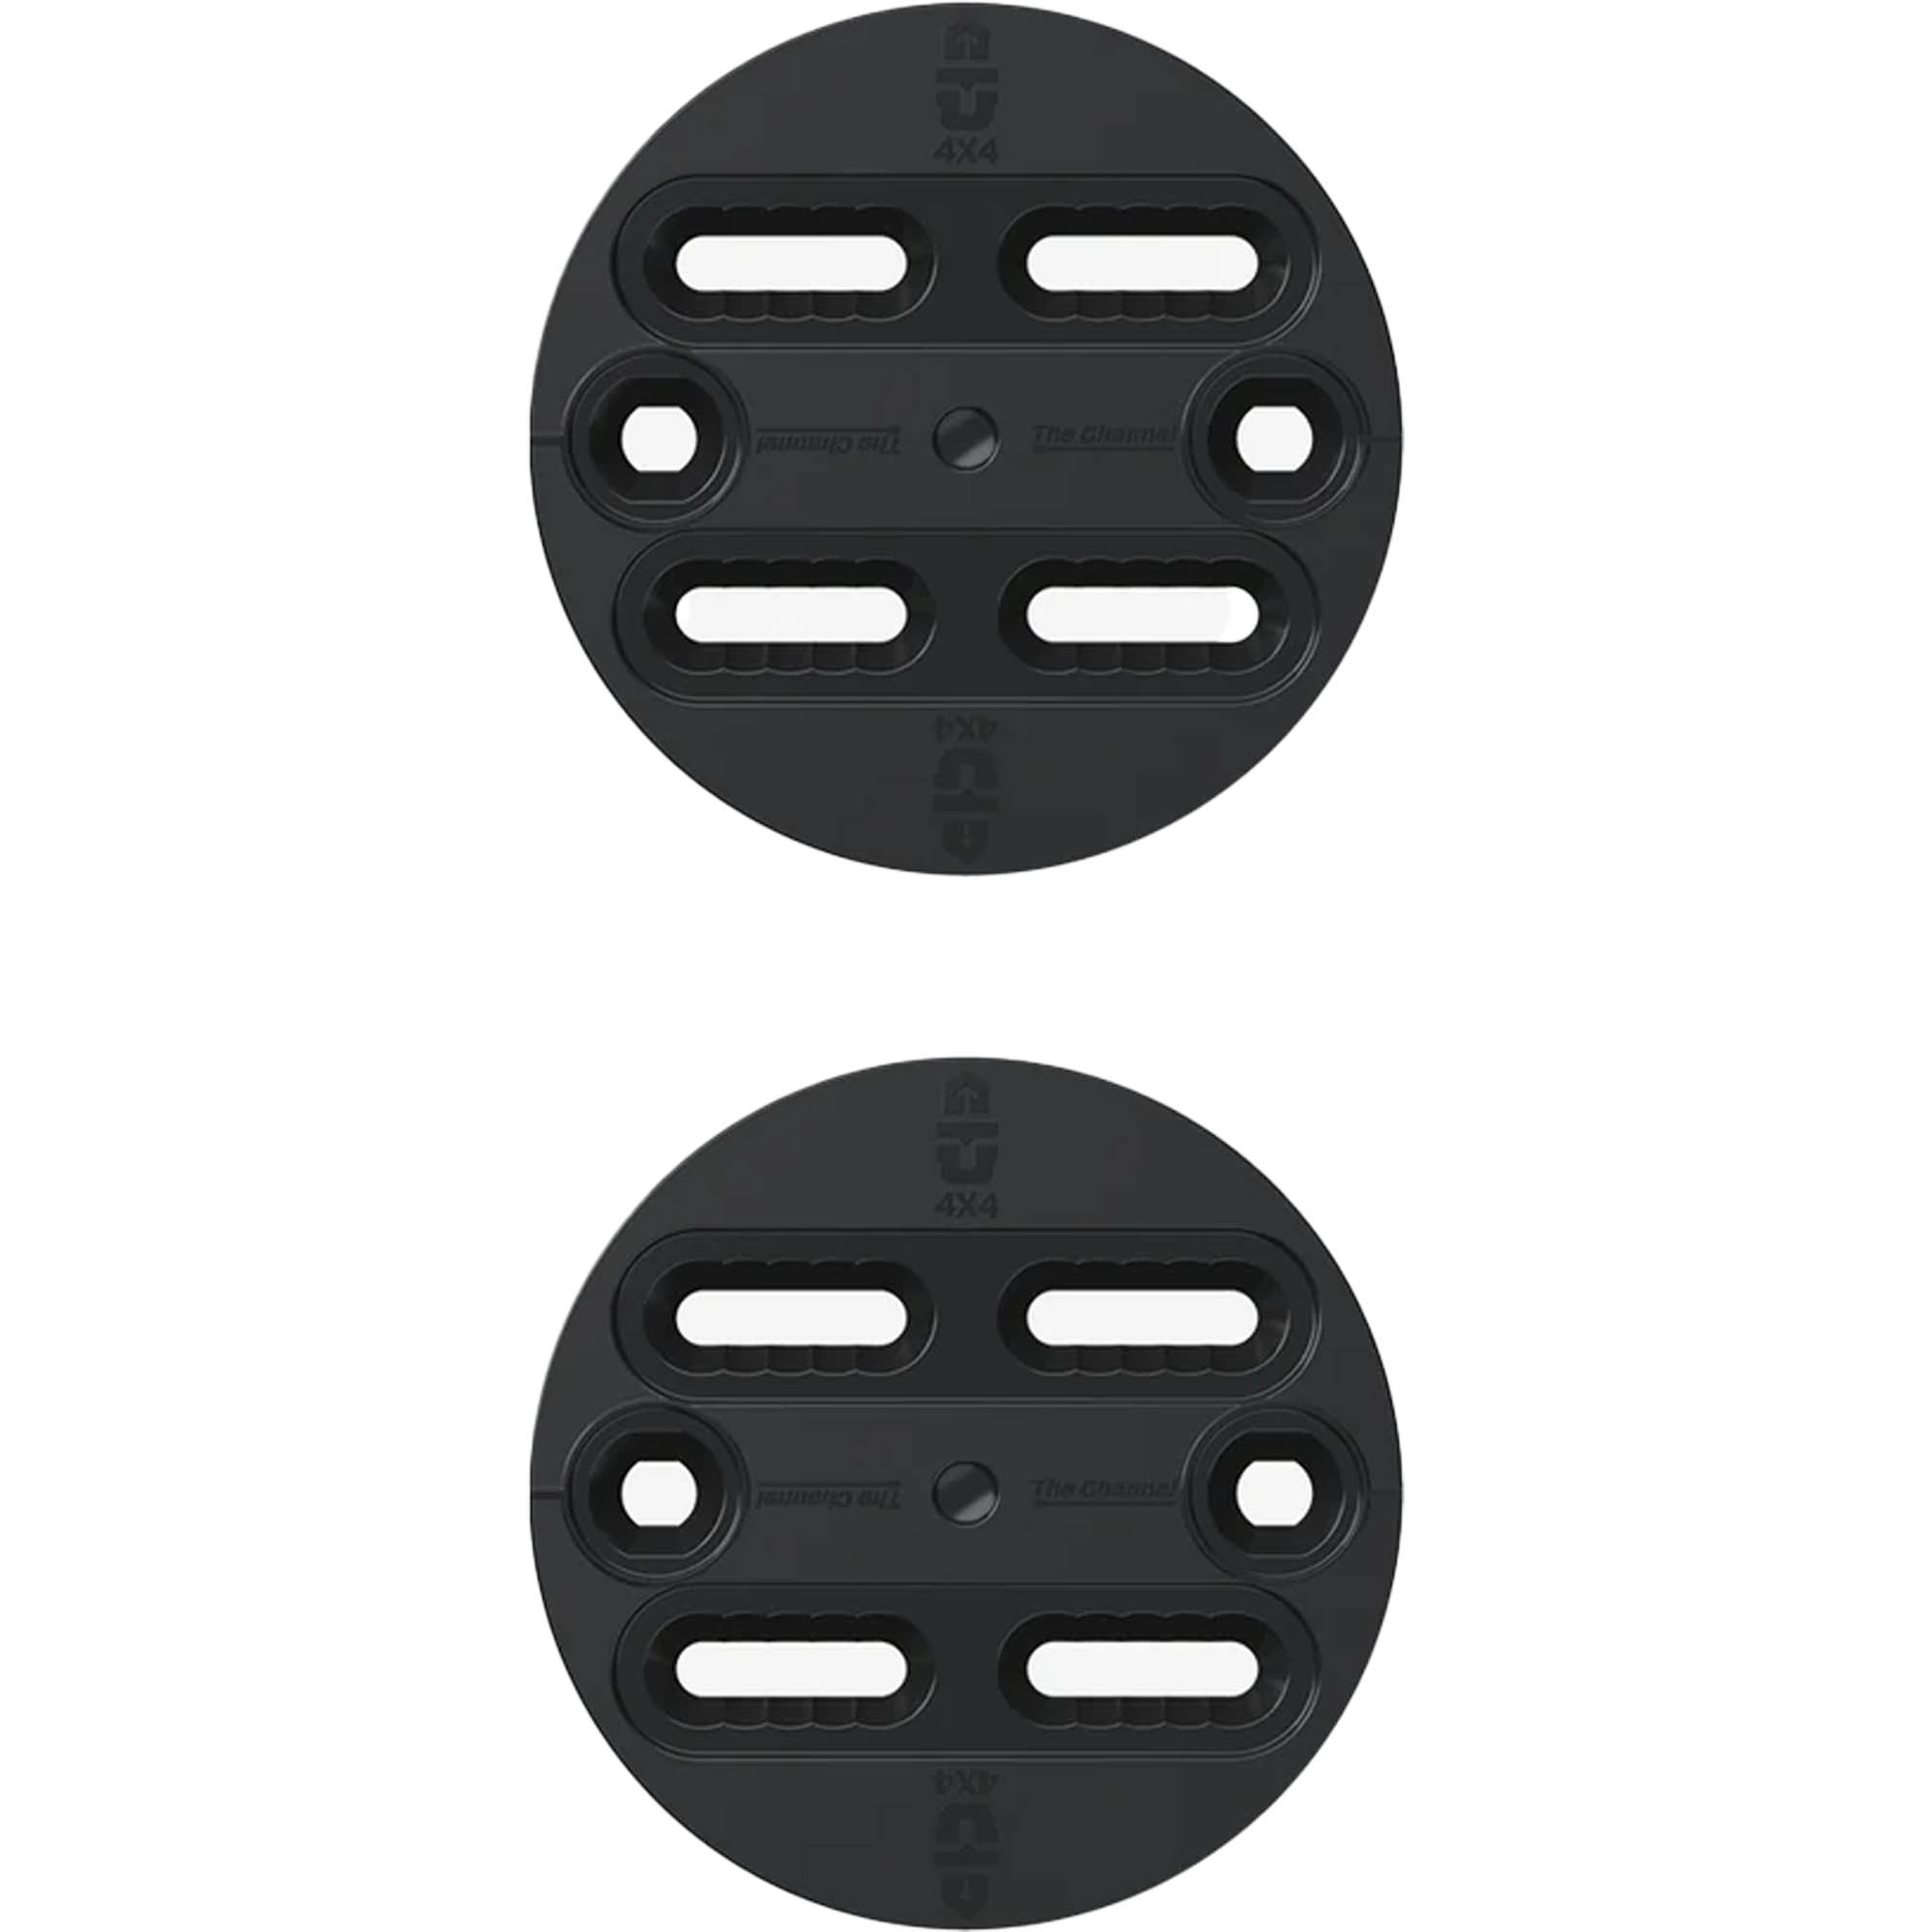 Union  Camber Disk Snowboard Binding Disk set